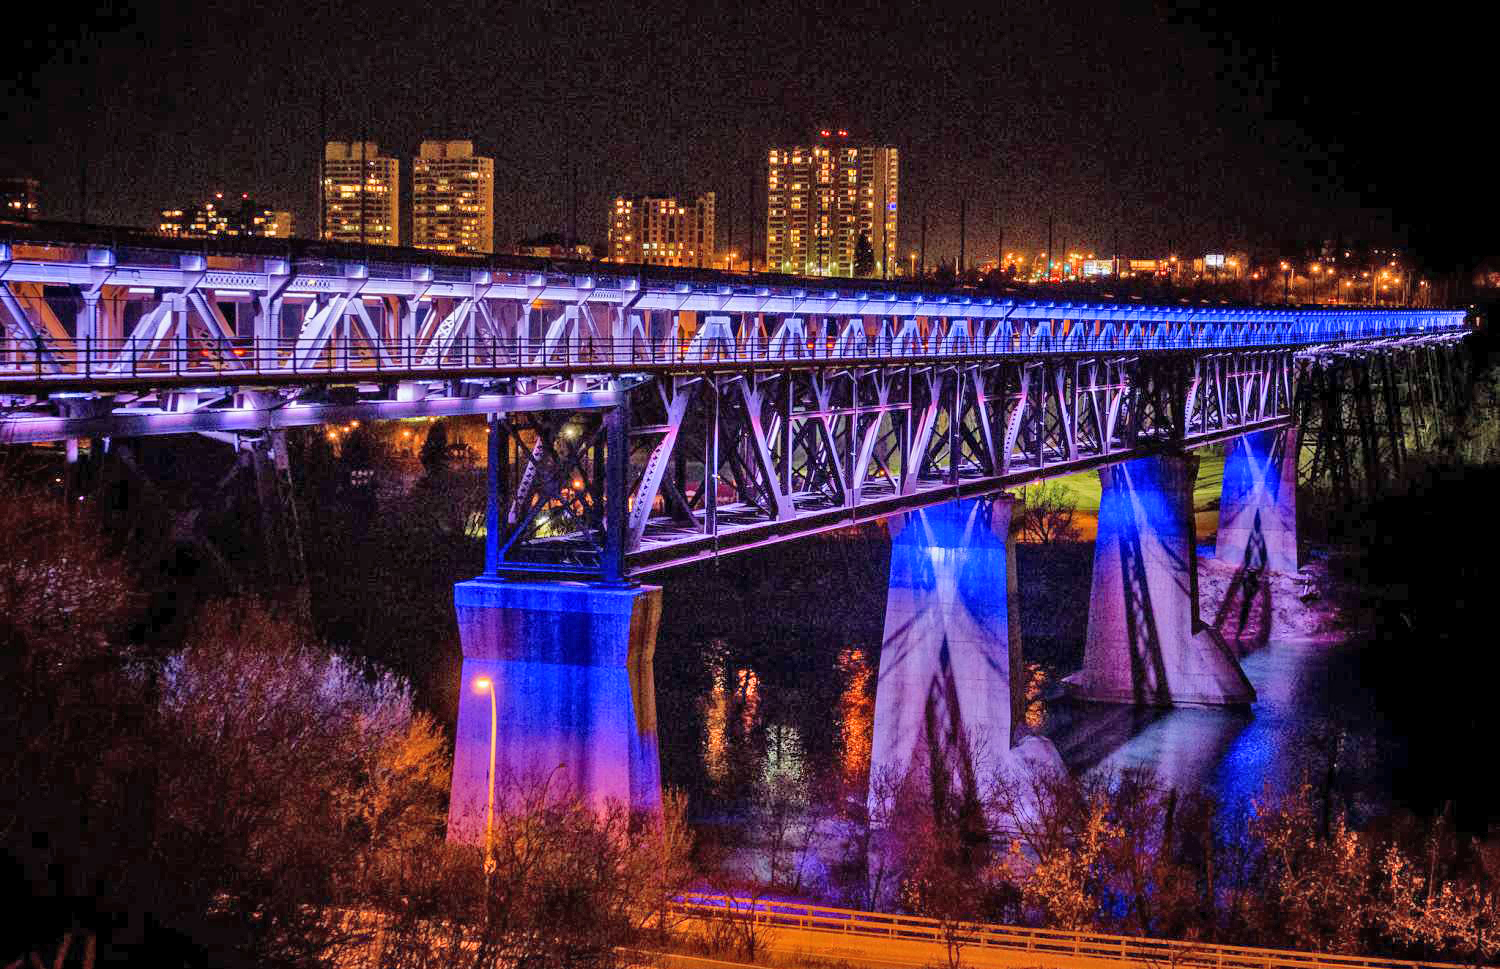 The girders and piers of the High-Level Bridge in Edmonton lit purple and blue, against city skyline.